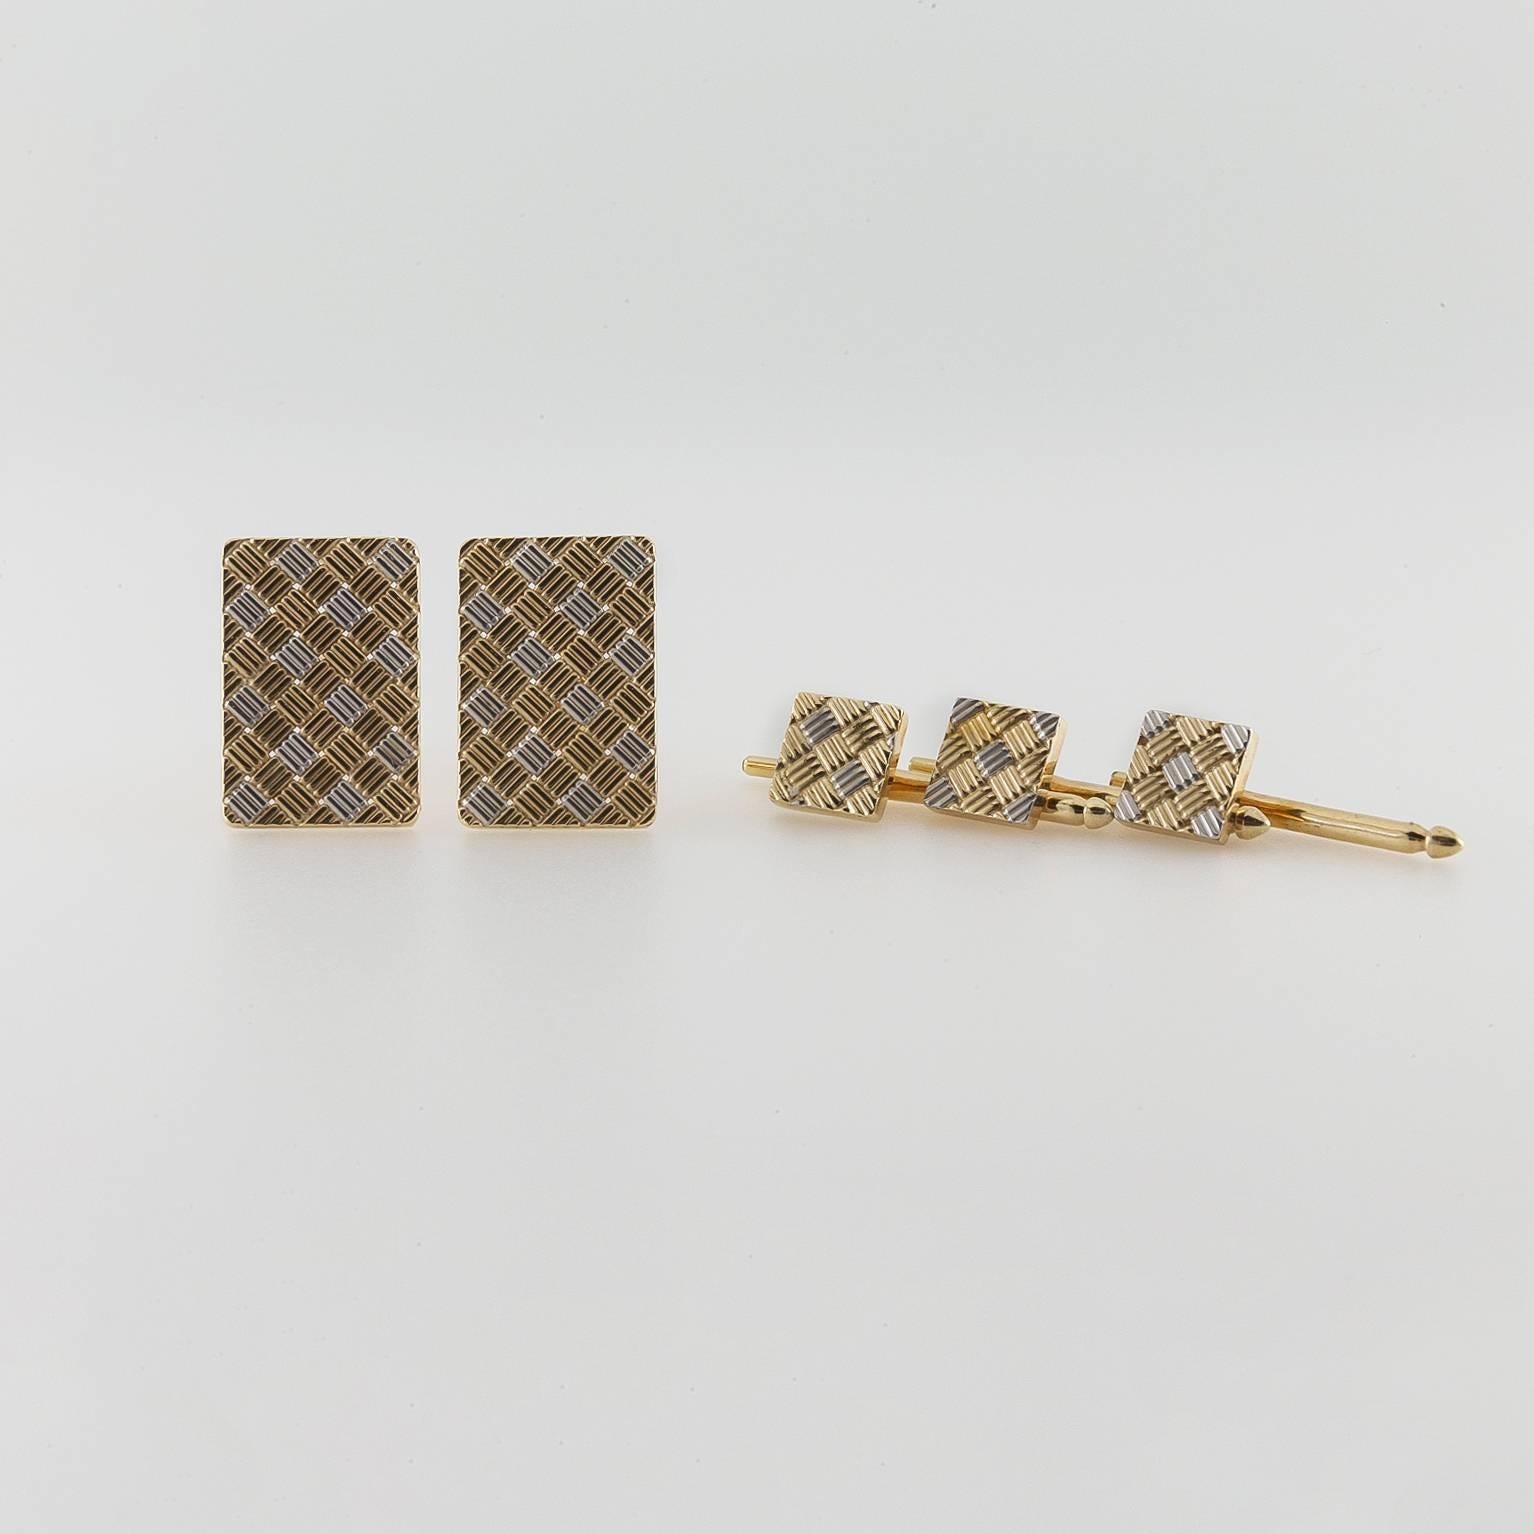 These cuff links create a profound and austere look with platinum and gold cross hatching that almost look woven. They add class to any outfit and the design is delicately mesmerizing. The set is can be worn on a tuxedo with all five pieces or the